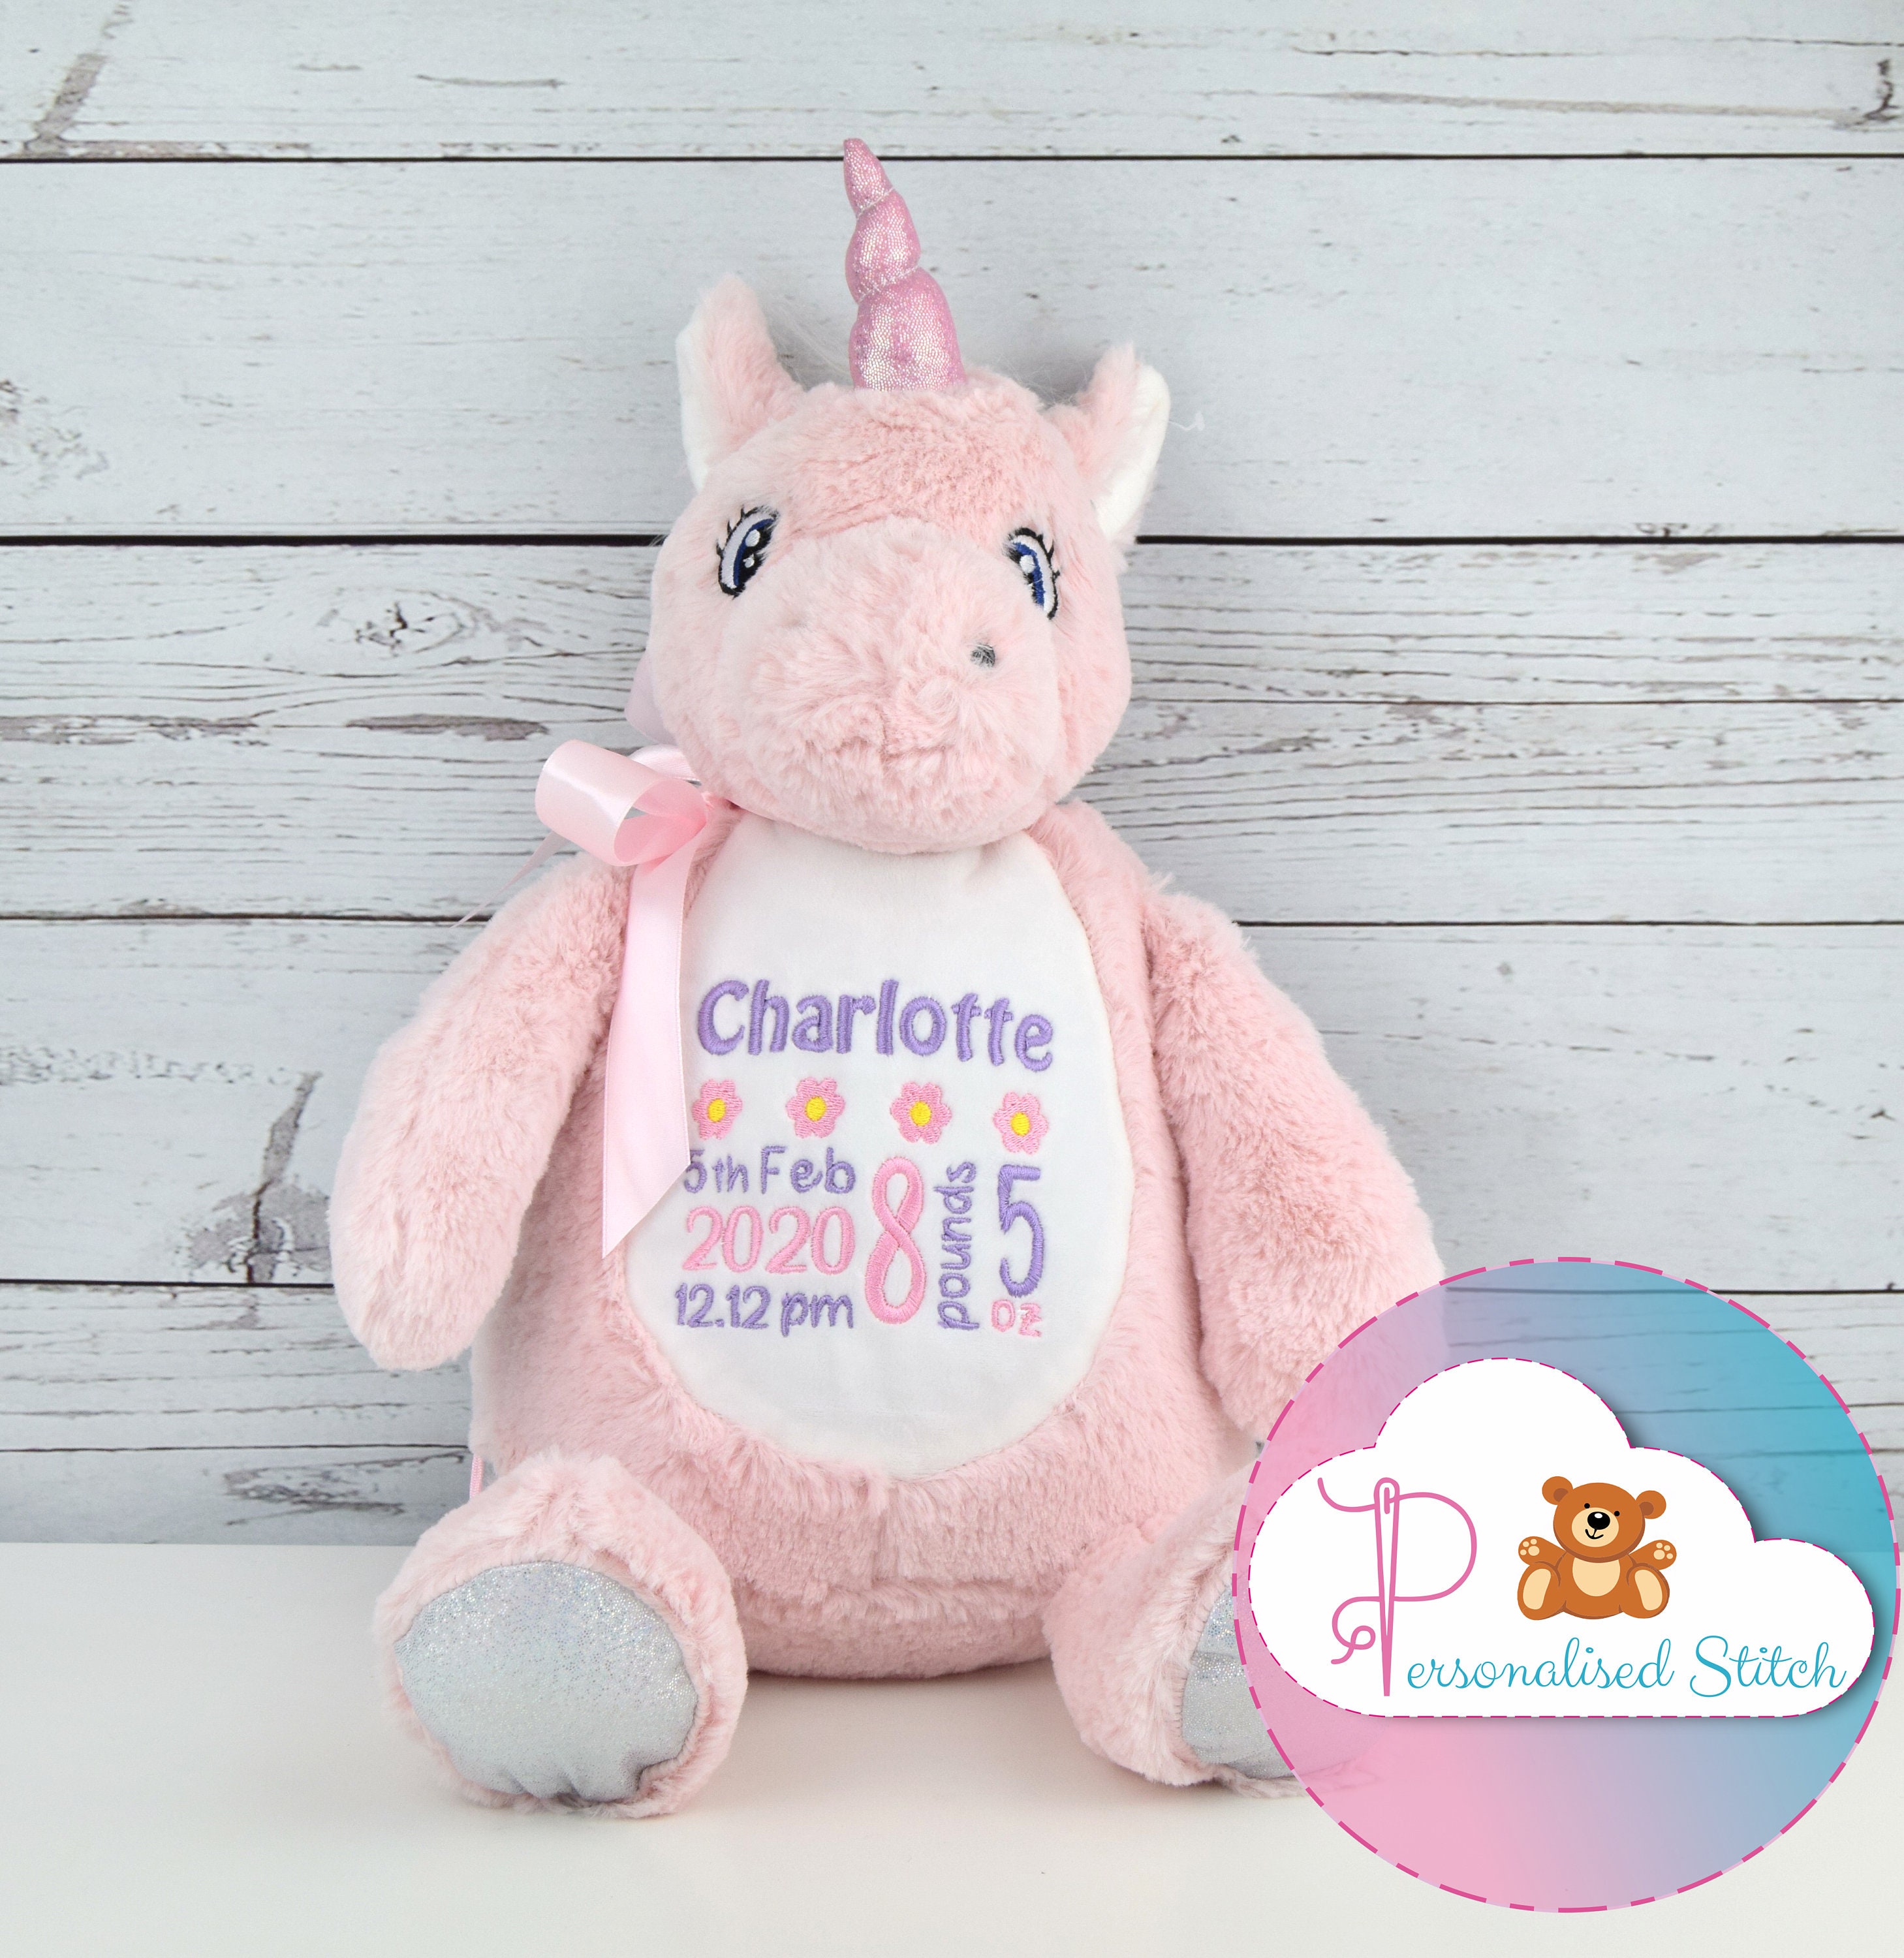 Little Stars Lunch Box - Charlotte's Web Monogramming & Gifts